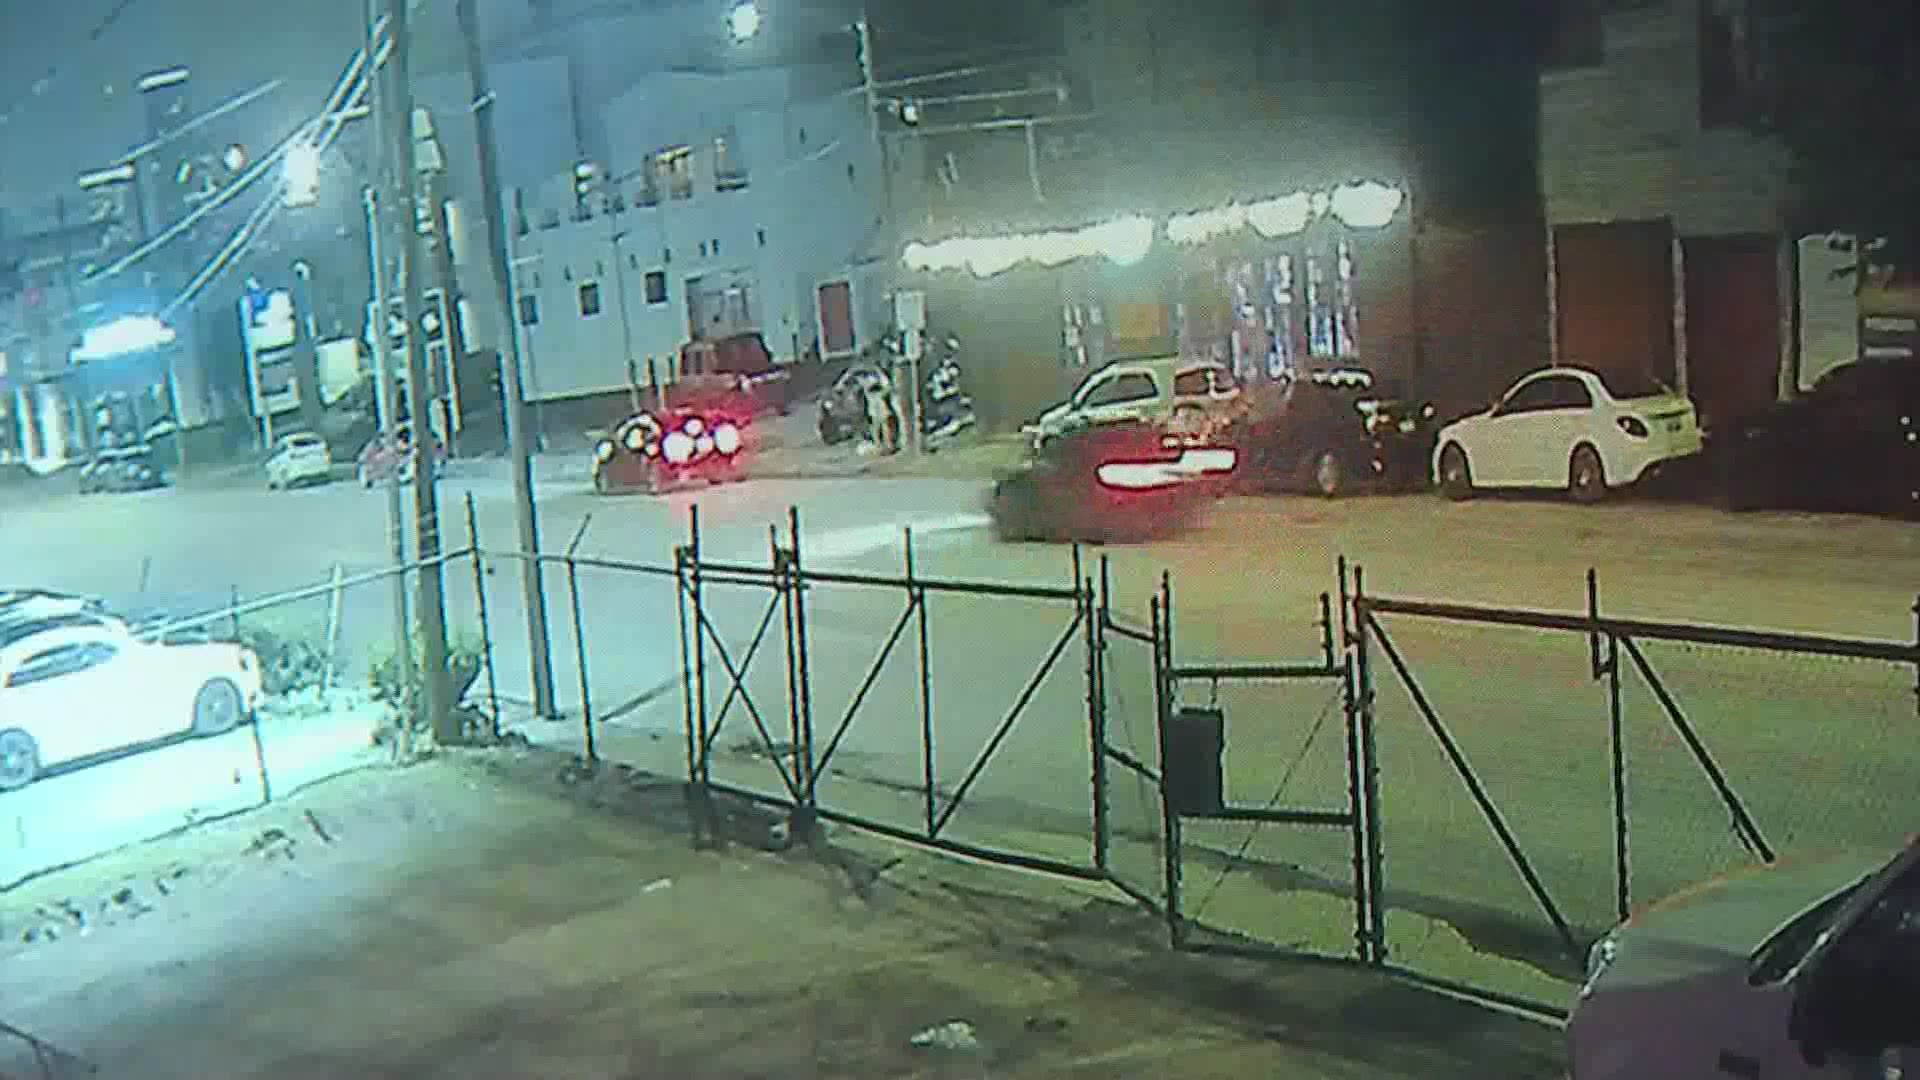 Houston police are looking for three suspects who opened fire on patrons at a Washington Avenue hookah club early Tuesday.